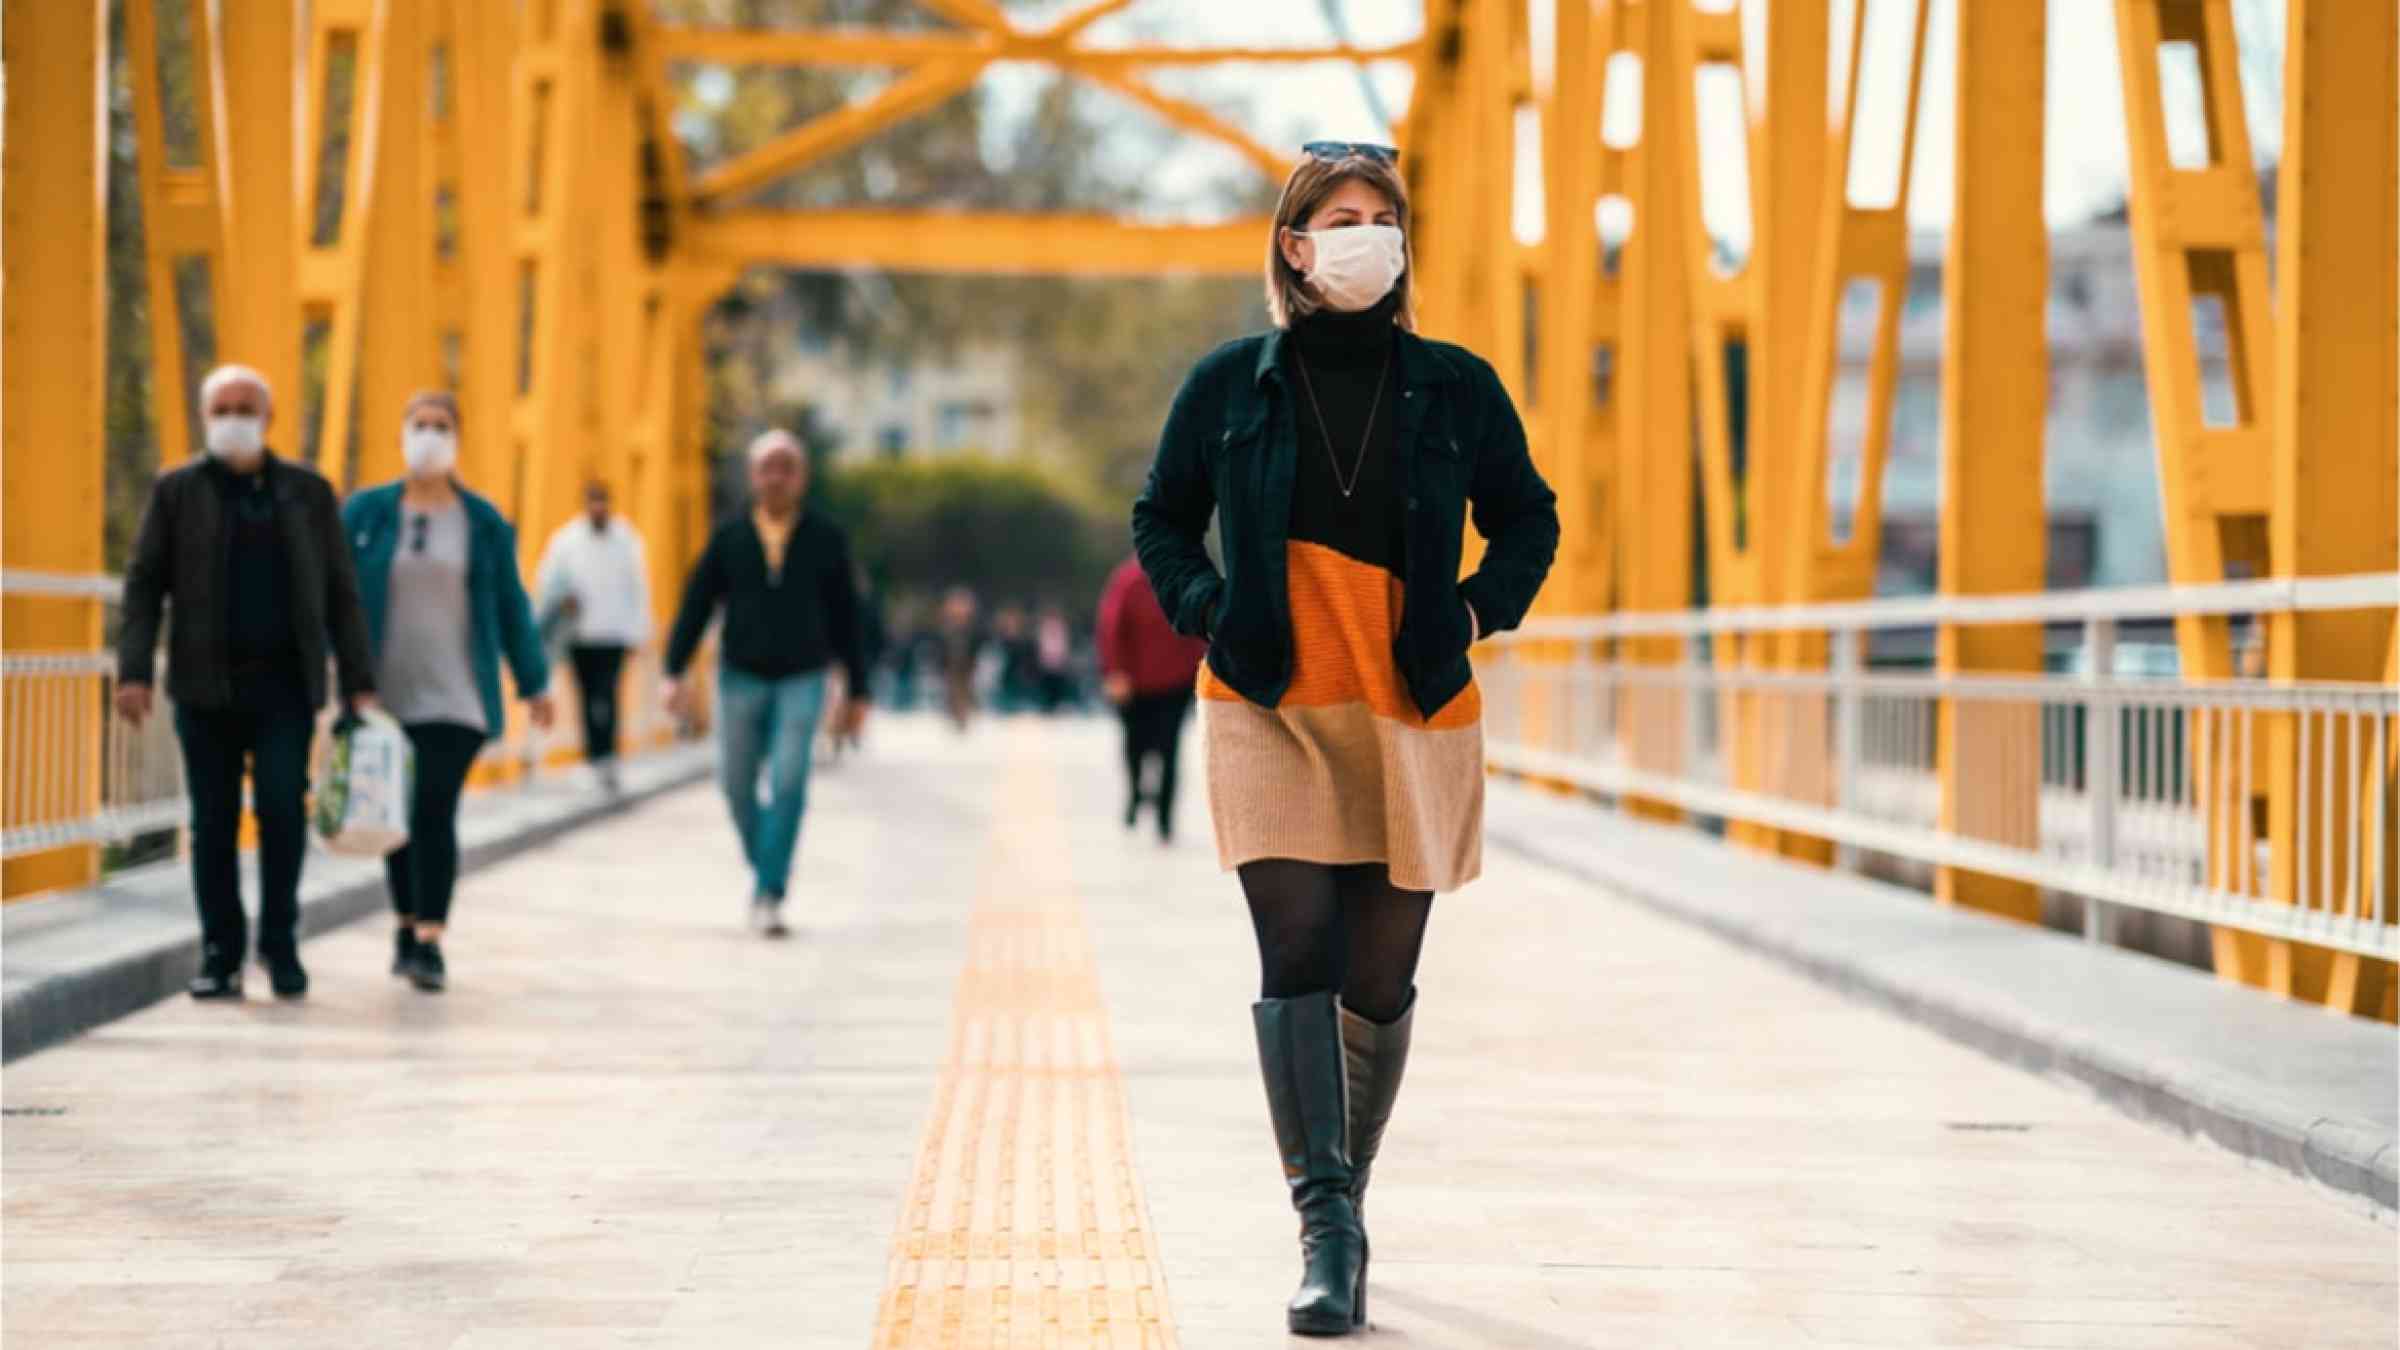 A woman wearing a face mask to protect herself from COVID-19 walking across a yellow bridge.